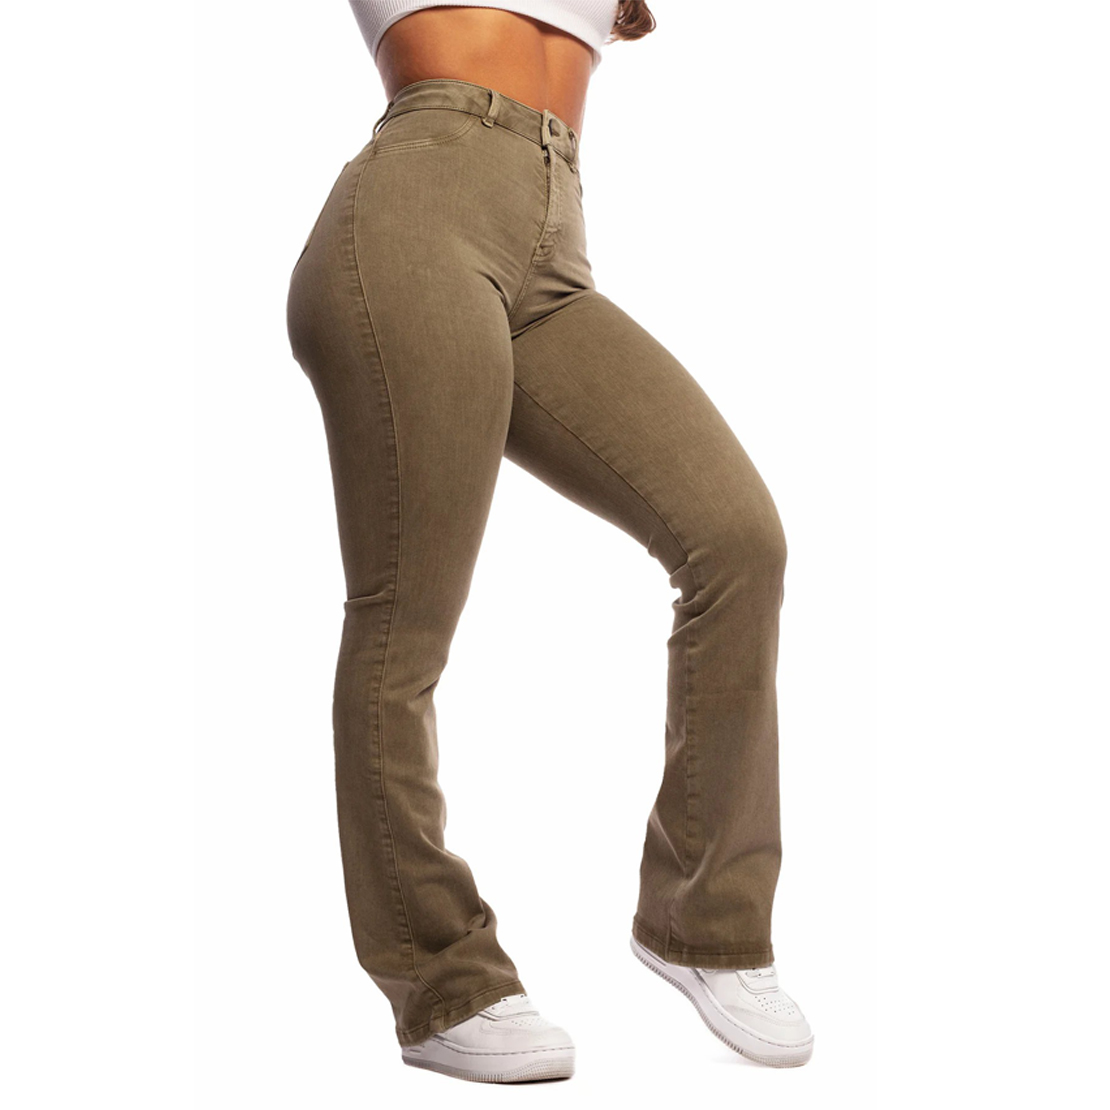 High Waistline Flared jeans (BUY 2 FREE SHIPPING)